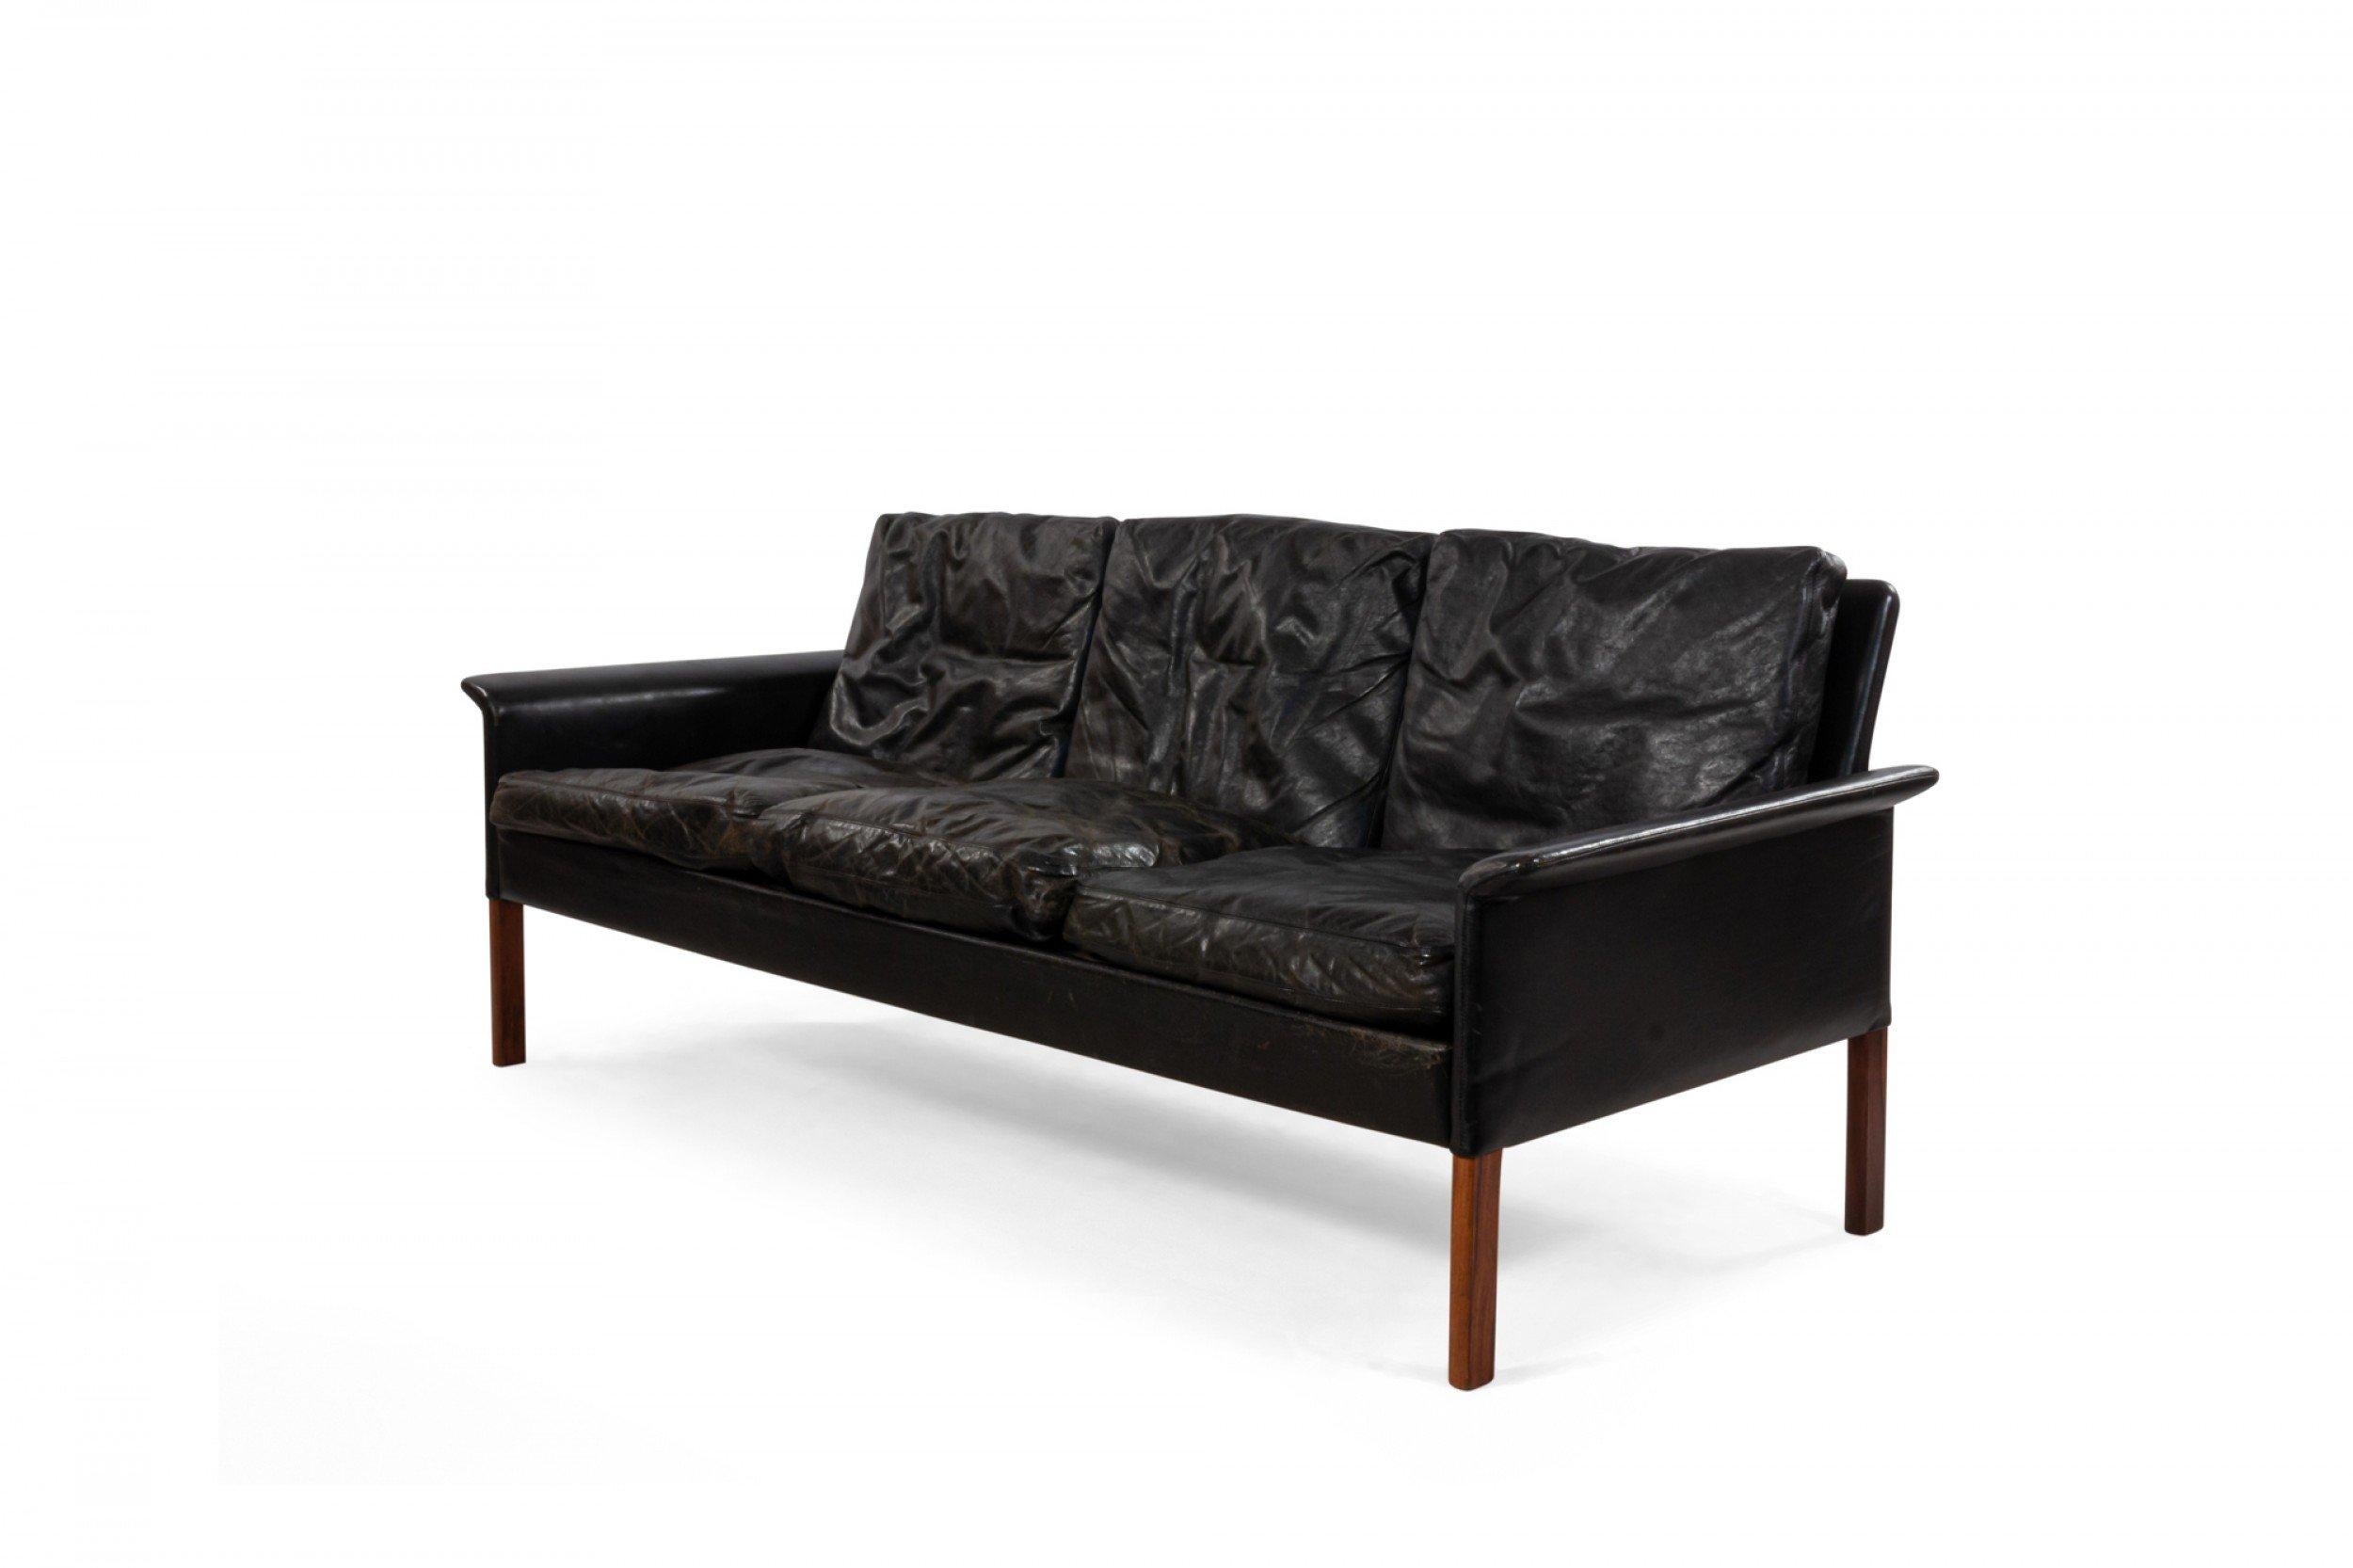 Midcentury Danish style black leather three-seat sofa with removable back and seat cushions and straight teak legs.